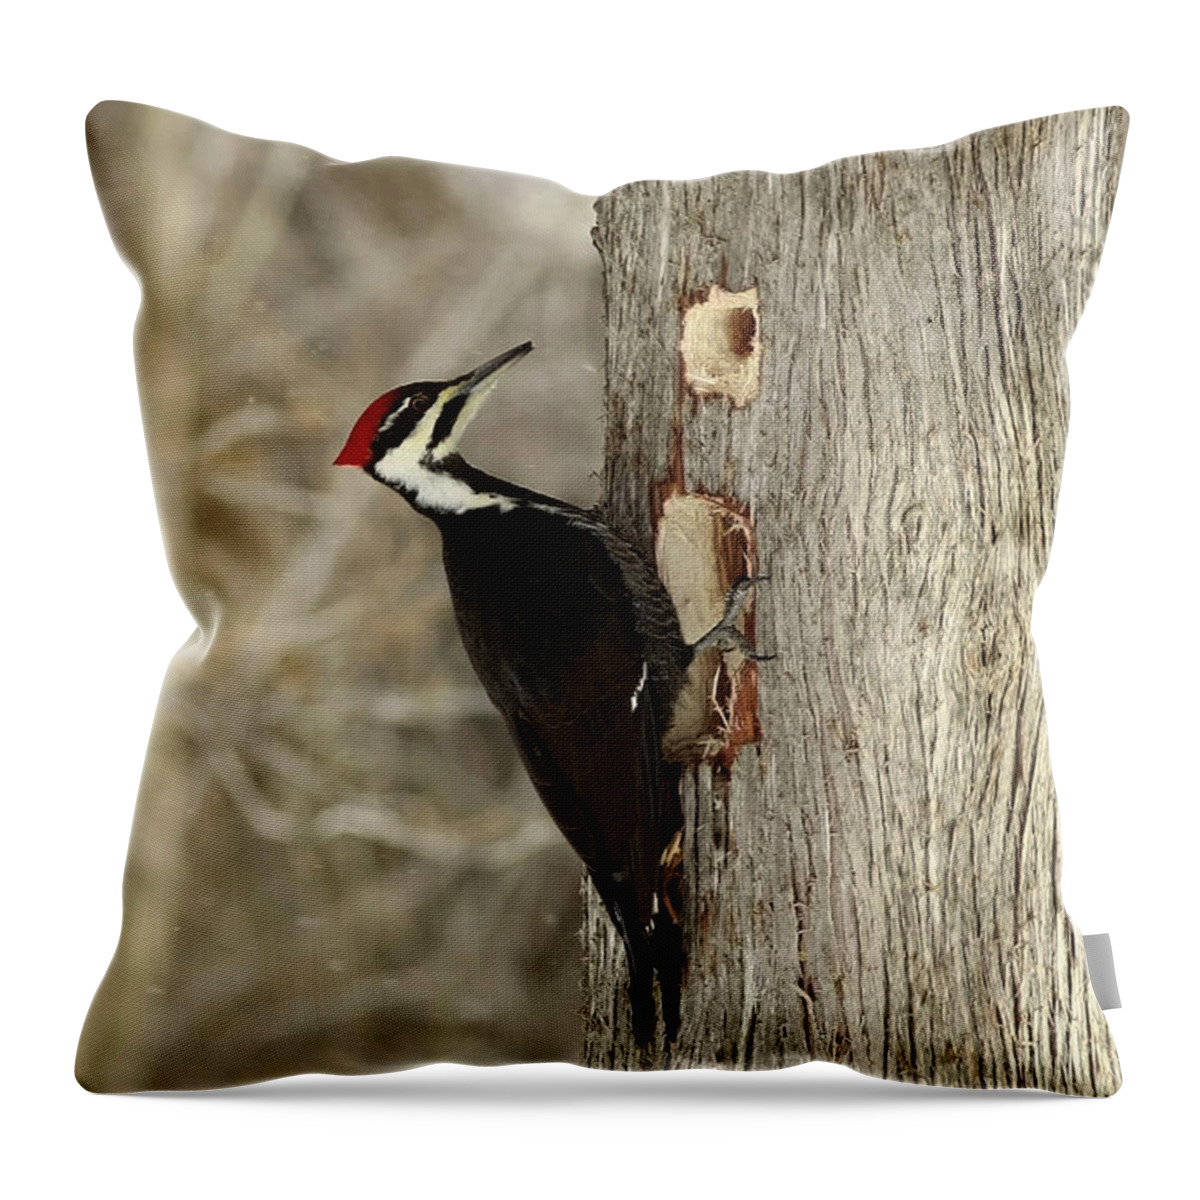 Cedar Tree Throw Pillow featuring the photograph Pileated Woodpecker Excavating a Cedar Tree by Inspired Nature Photography Fine Art Photography